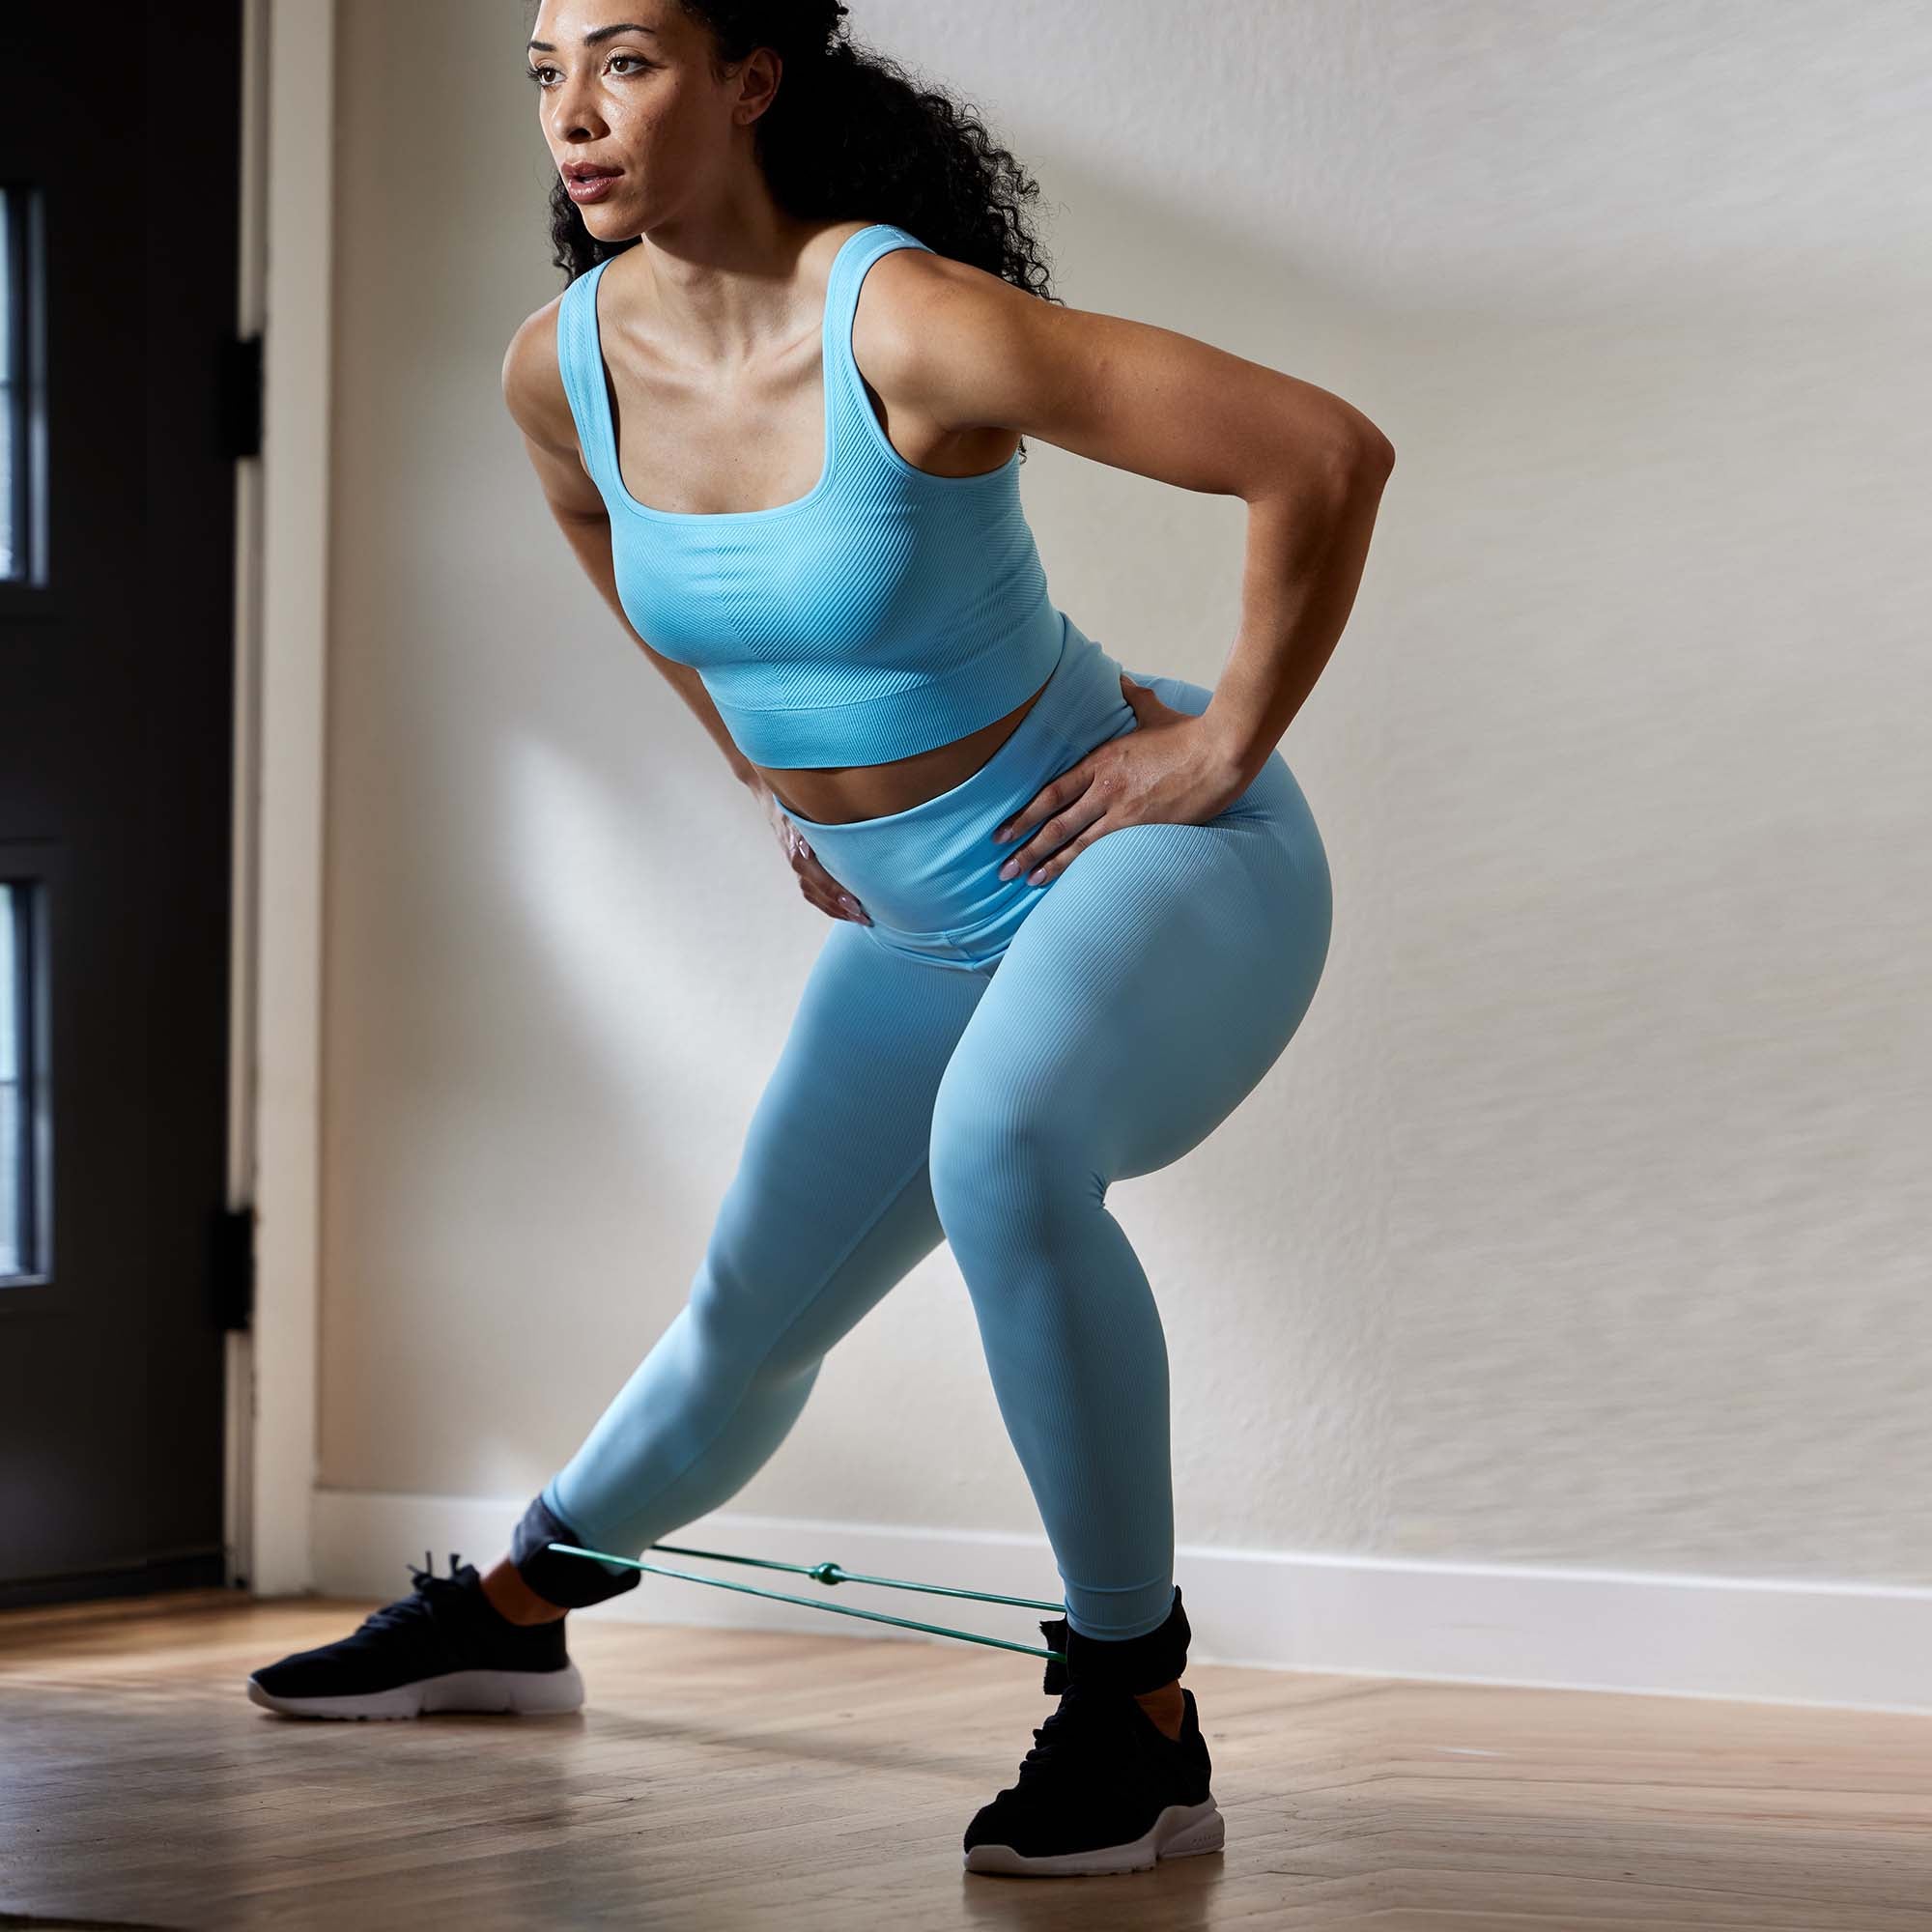 Person doing a Side Lunge while wearing the Xercuff 